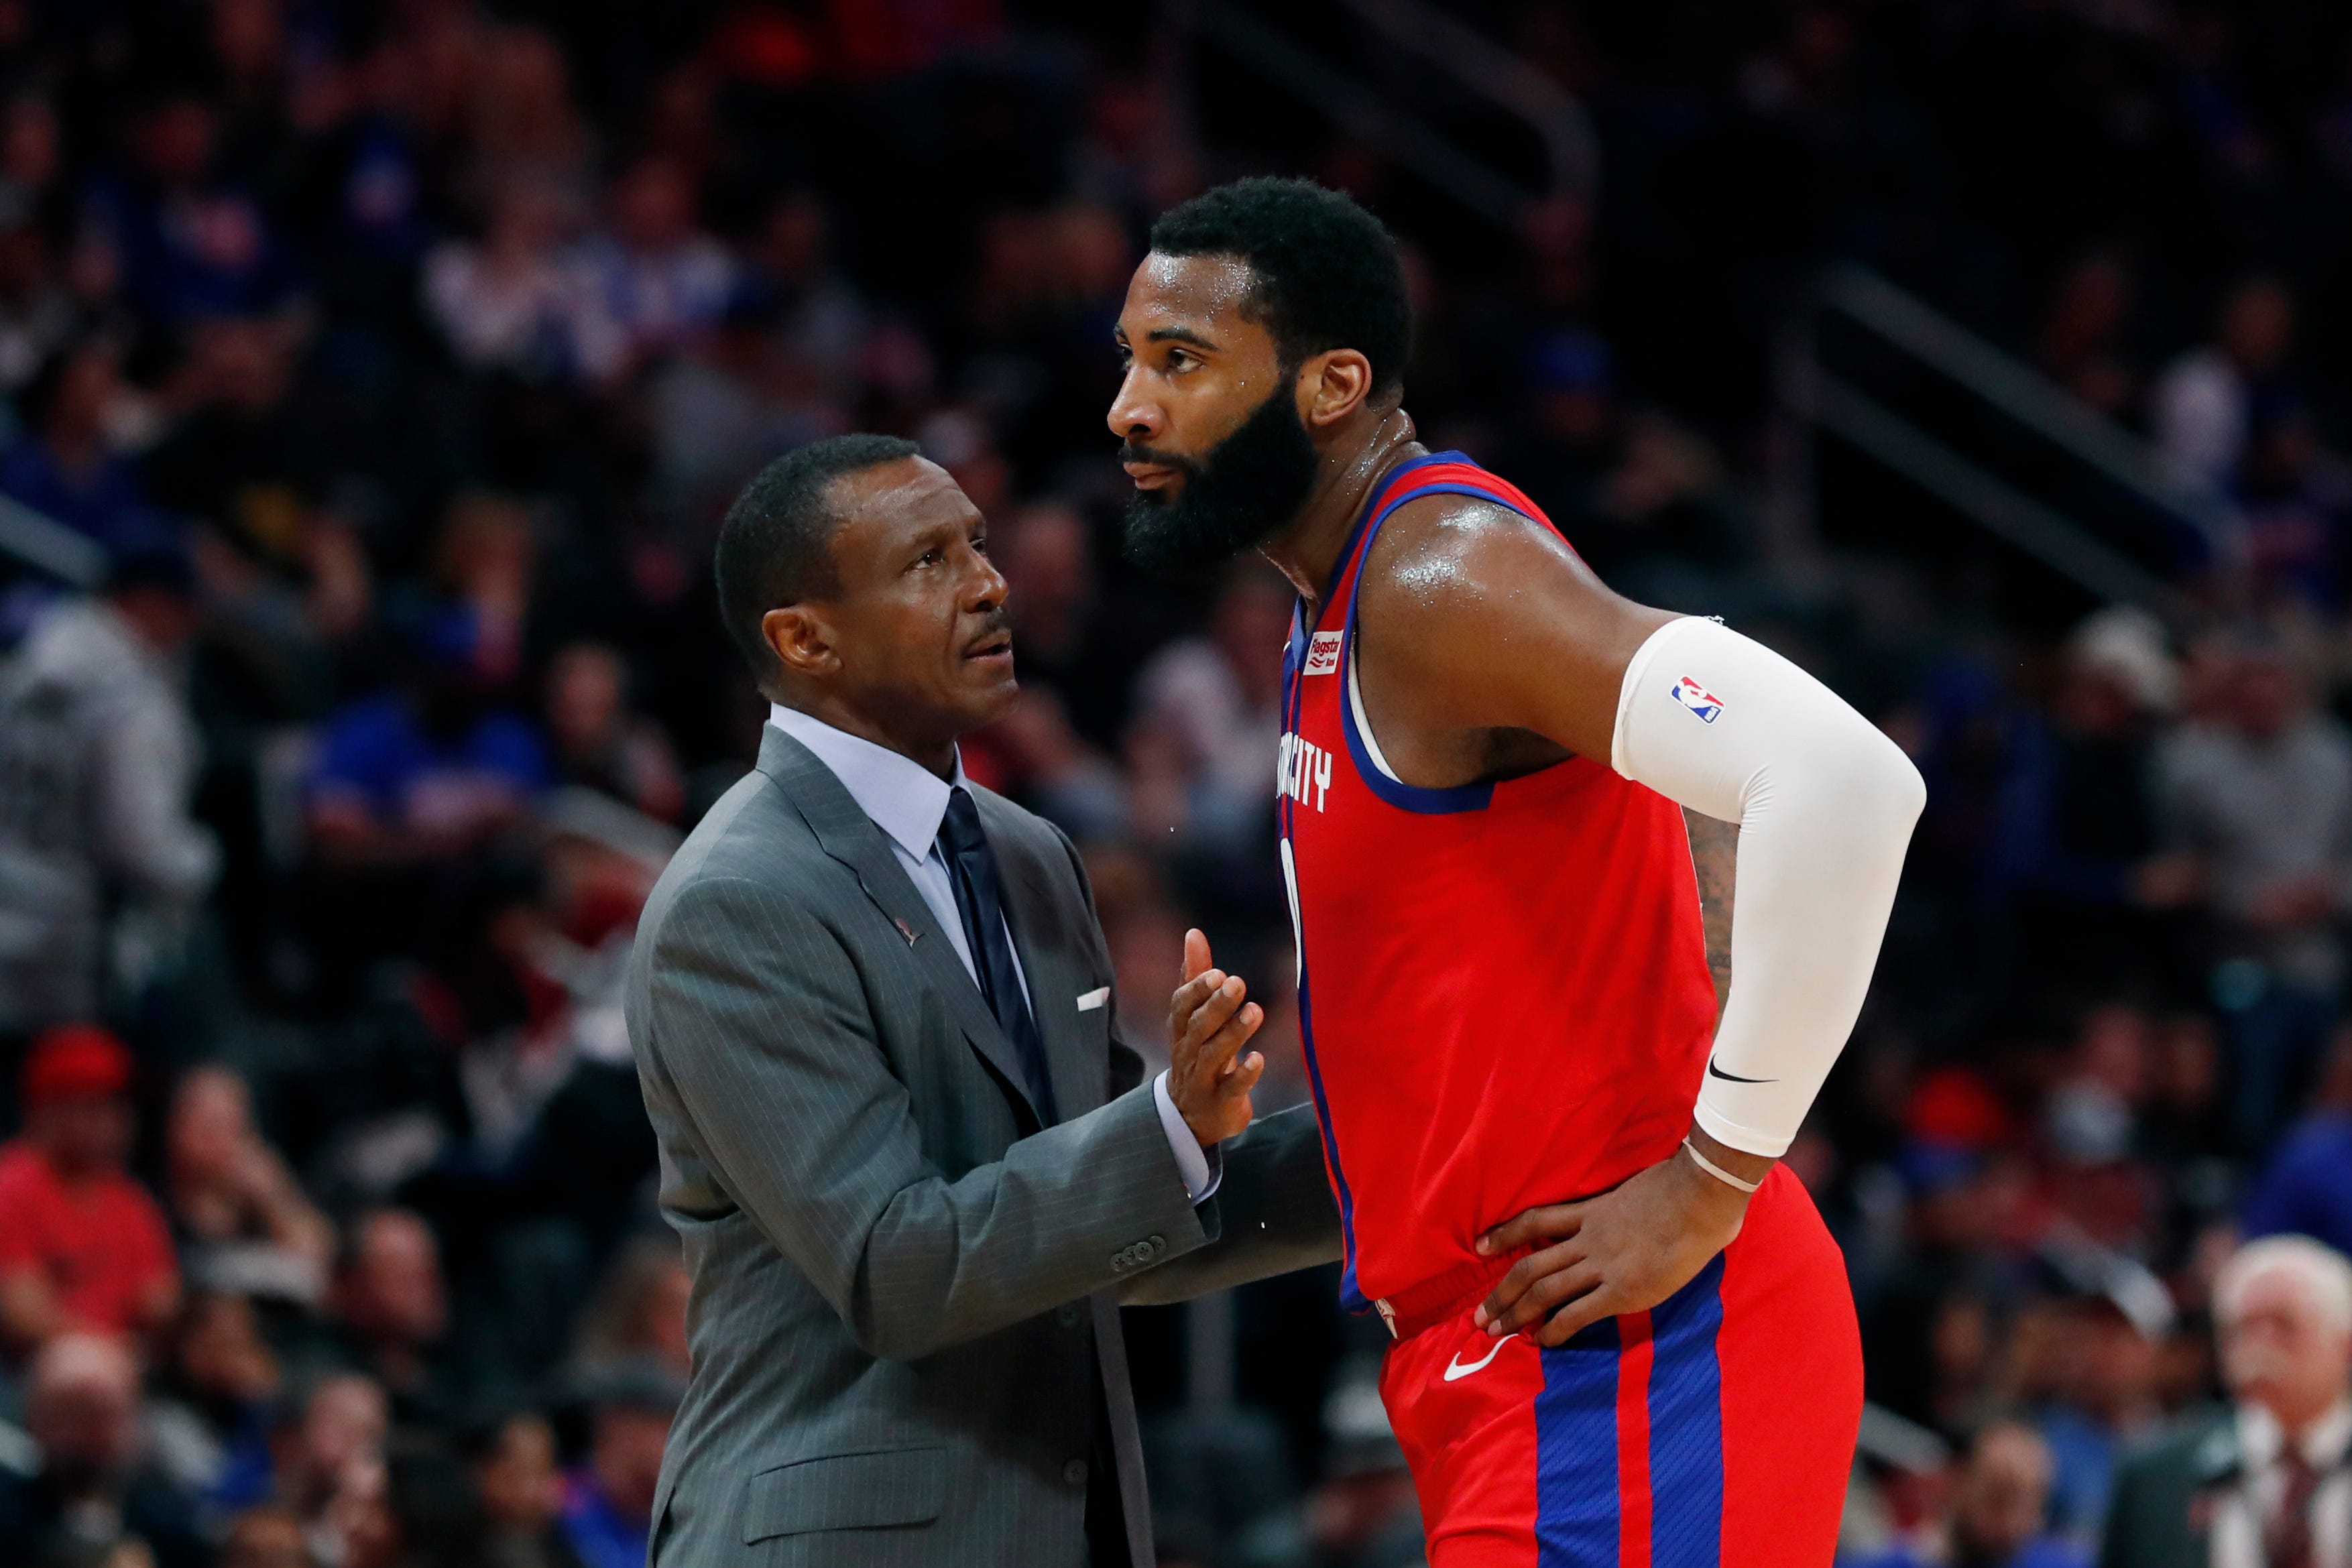 Detroit Pistons head coach Dwane Casey talks with center Andre Drummond during the first half.